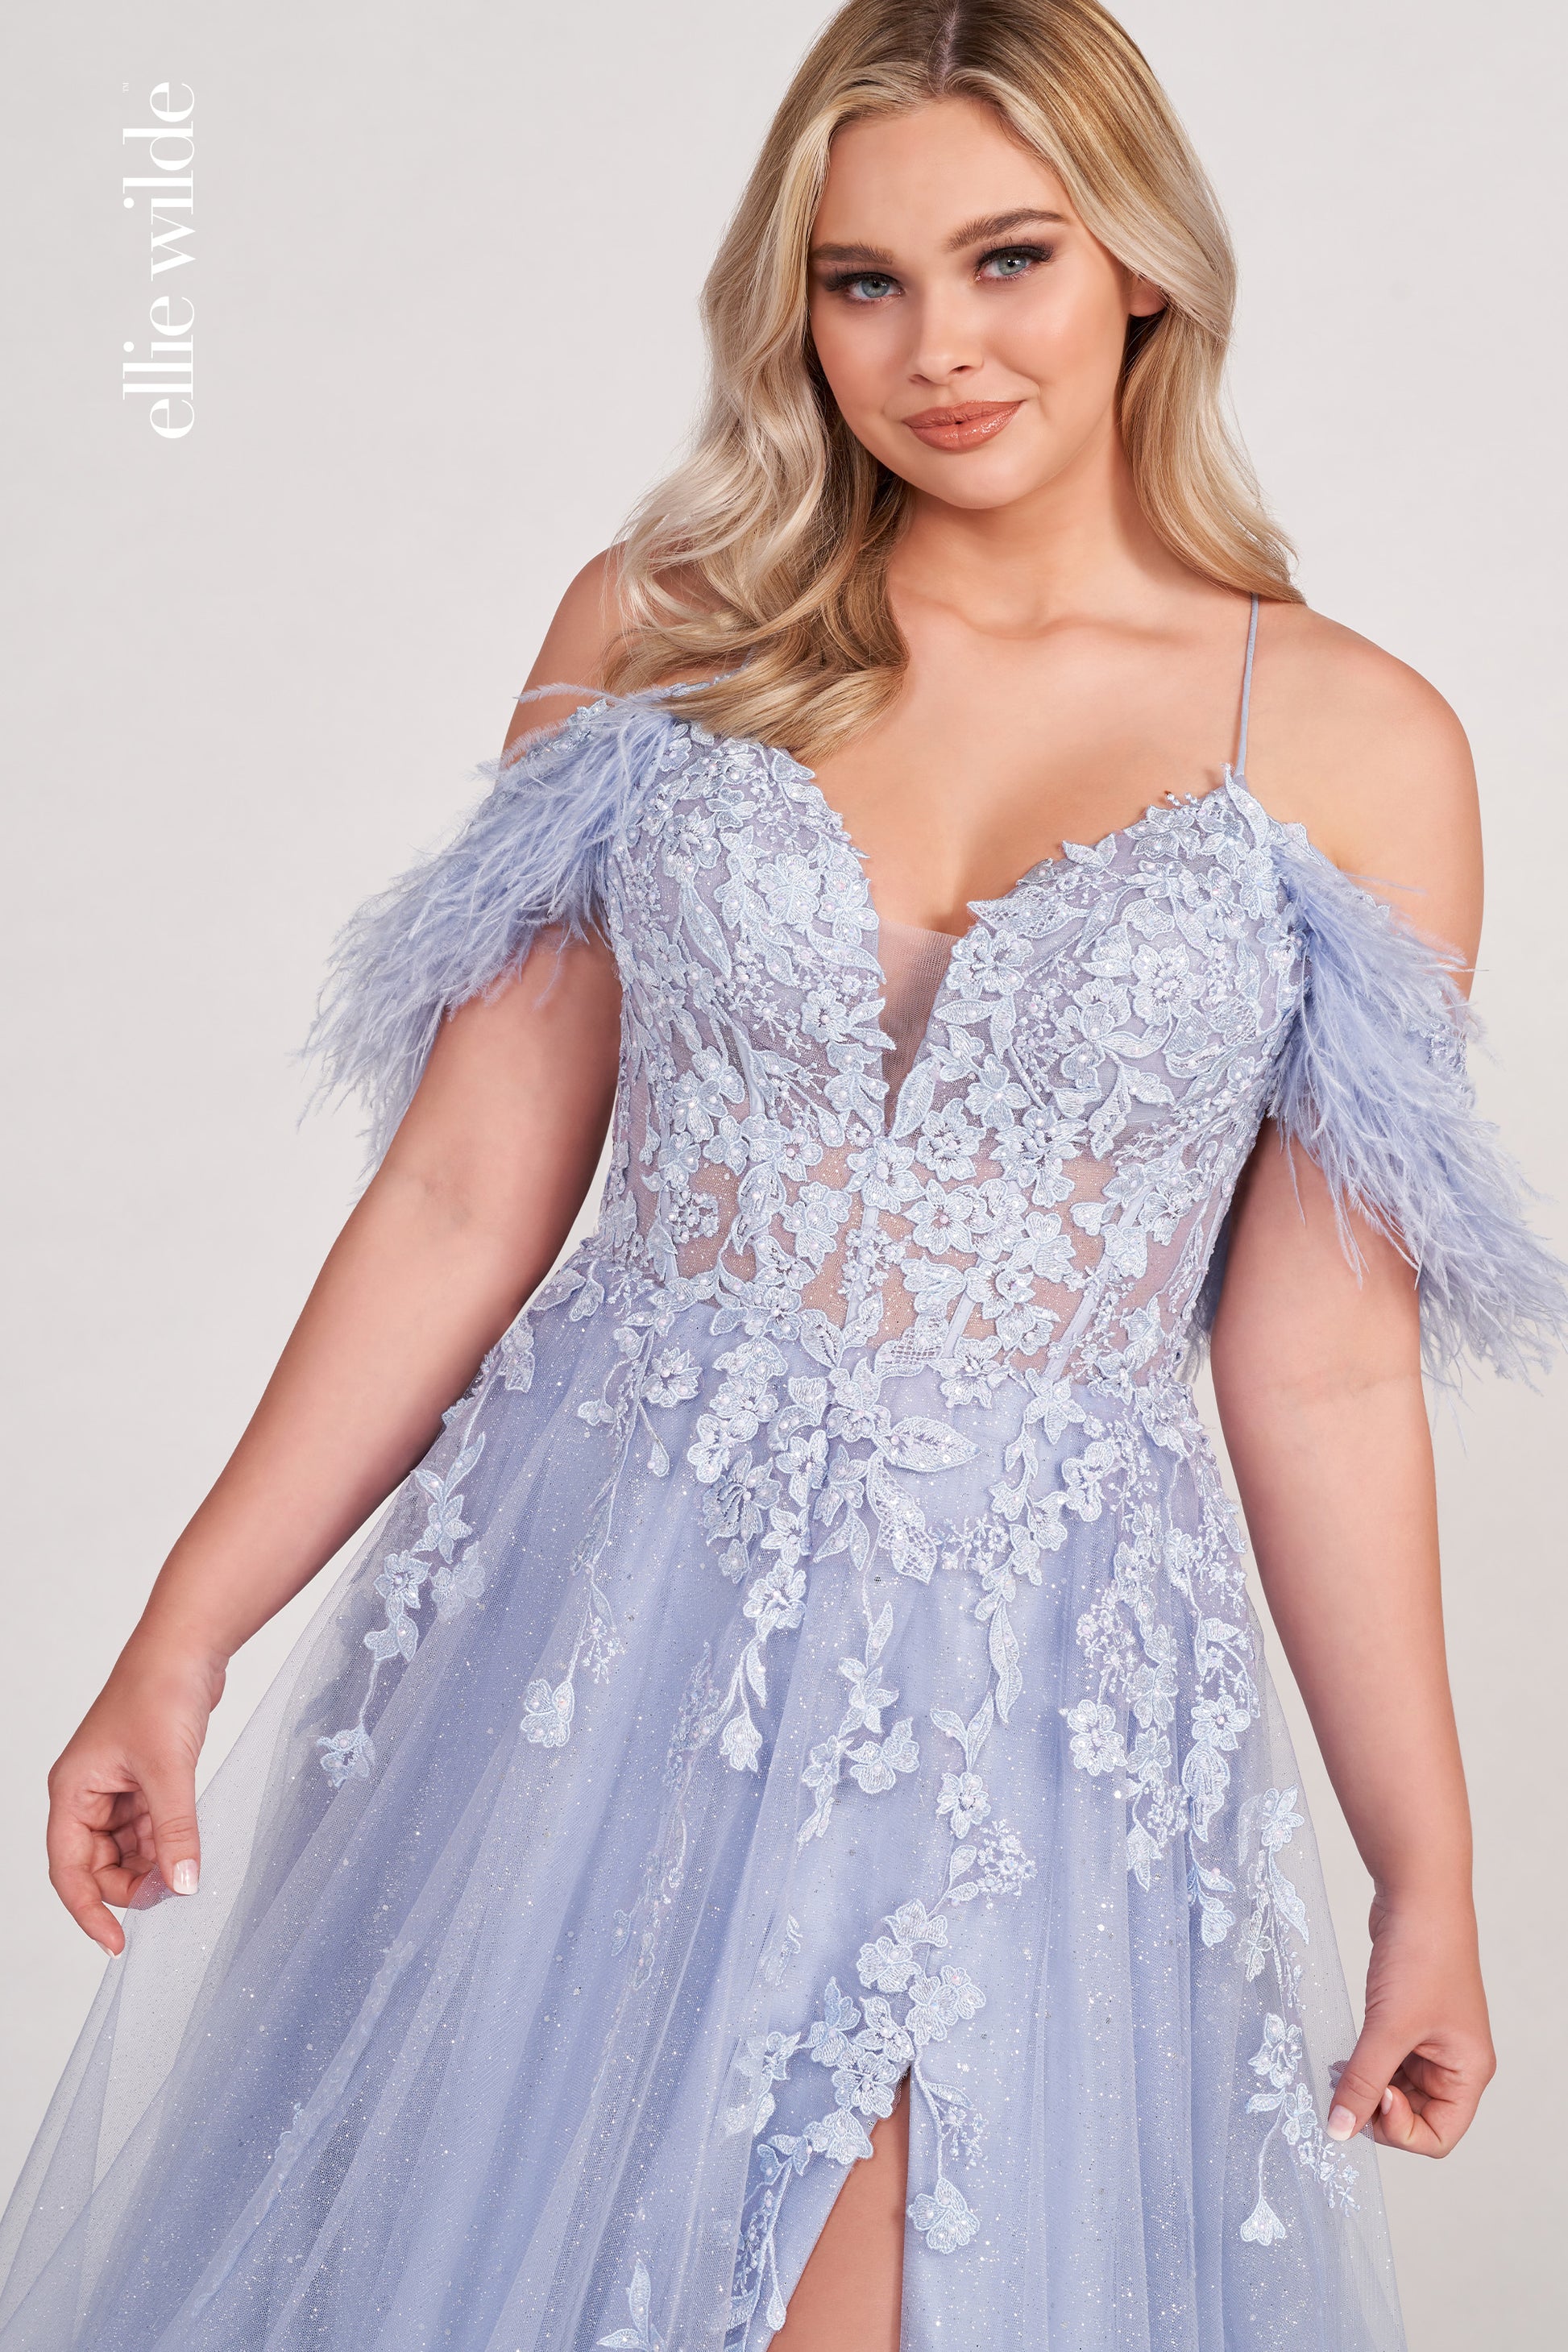 The Ellie Wilde EW34066 is a stunning A-line gown with a sheer sequin corset and feather off-the-shoulder detail. Boasting a dazzling shimmer finish and dramatic slit, this exquisite dress will make you the belle of the ball.  Sizes: 00-16  Colors: ORANGE, RED, PERIWINKLE, IRIS